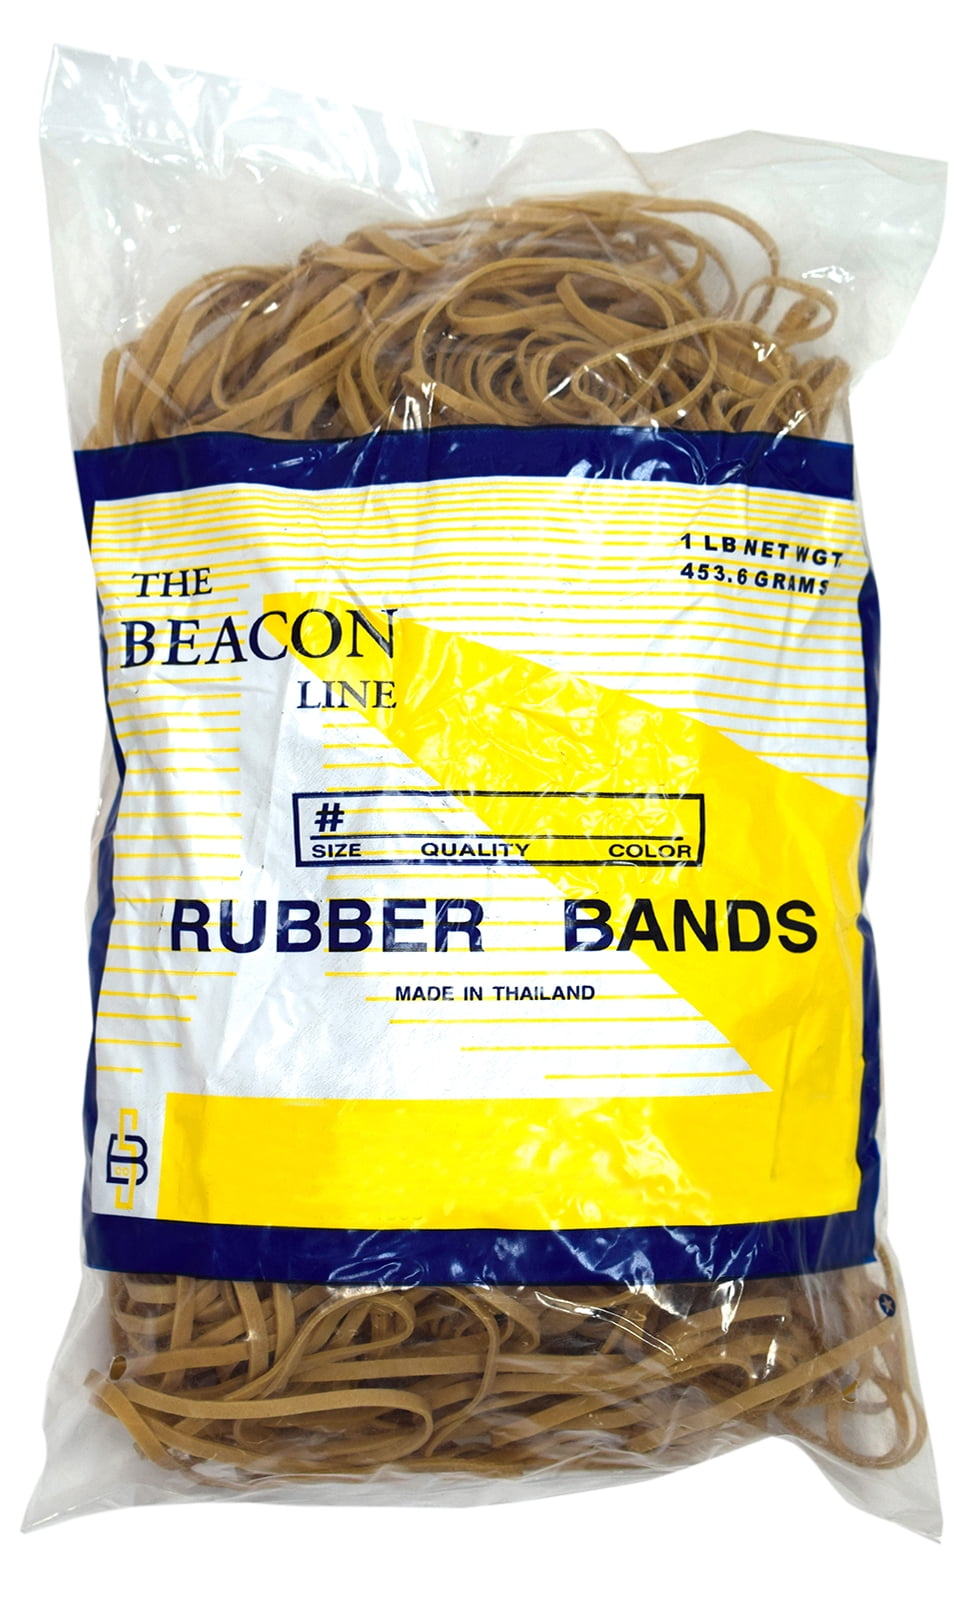 Bag Assorted Sizes for sale online 9 Bags Alliance 26131 Rubber Bands Natural 2 Oz